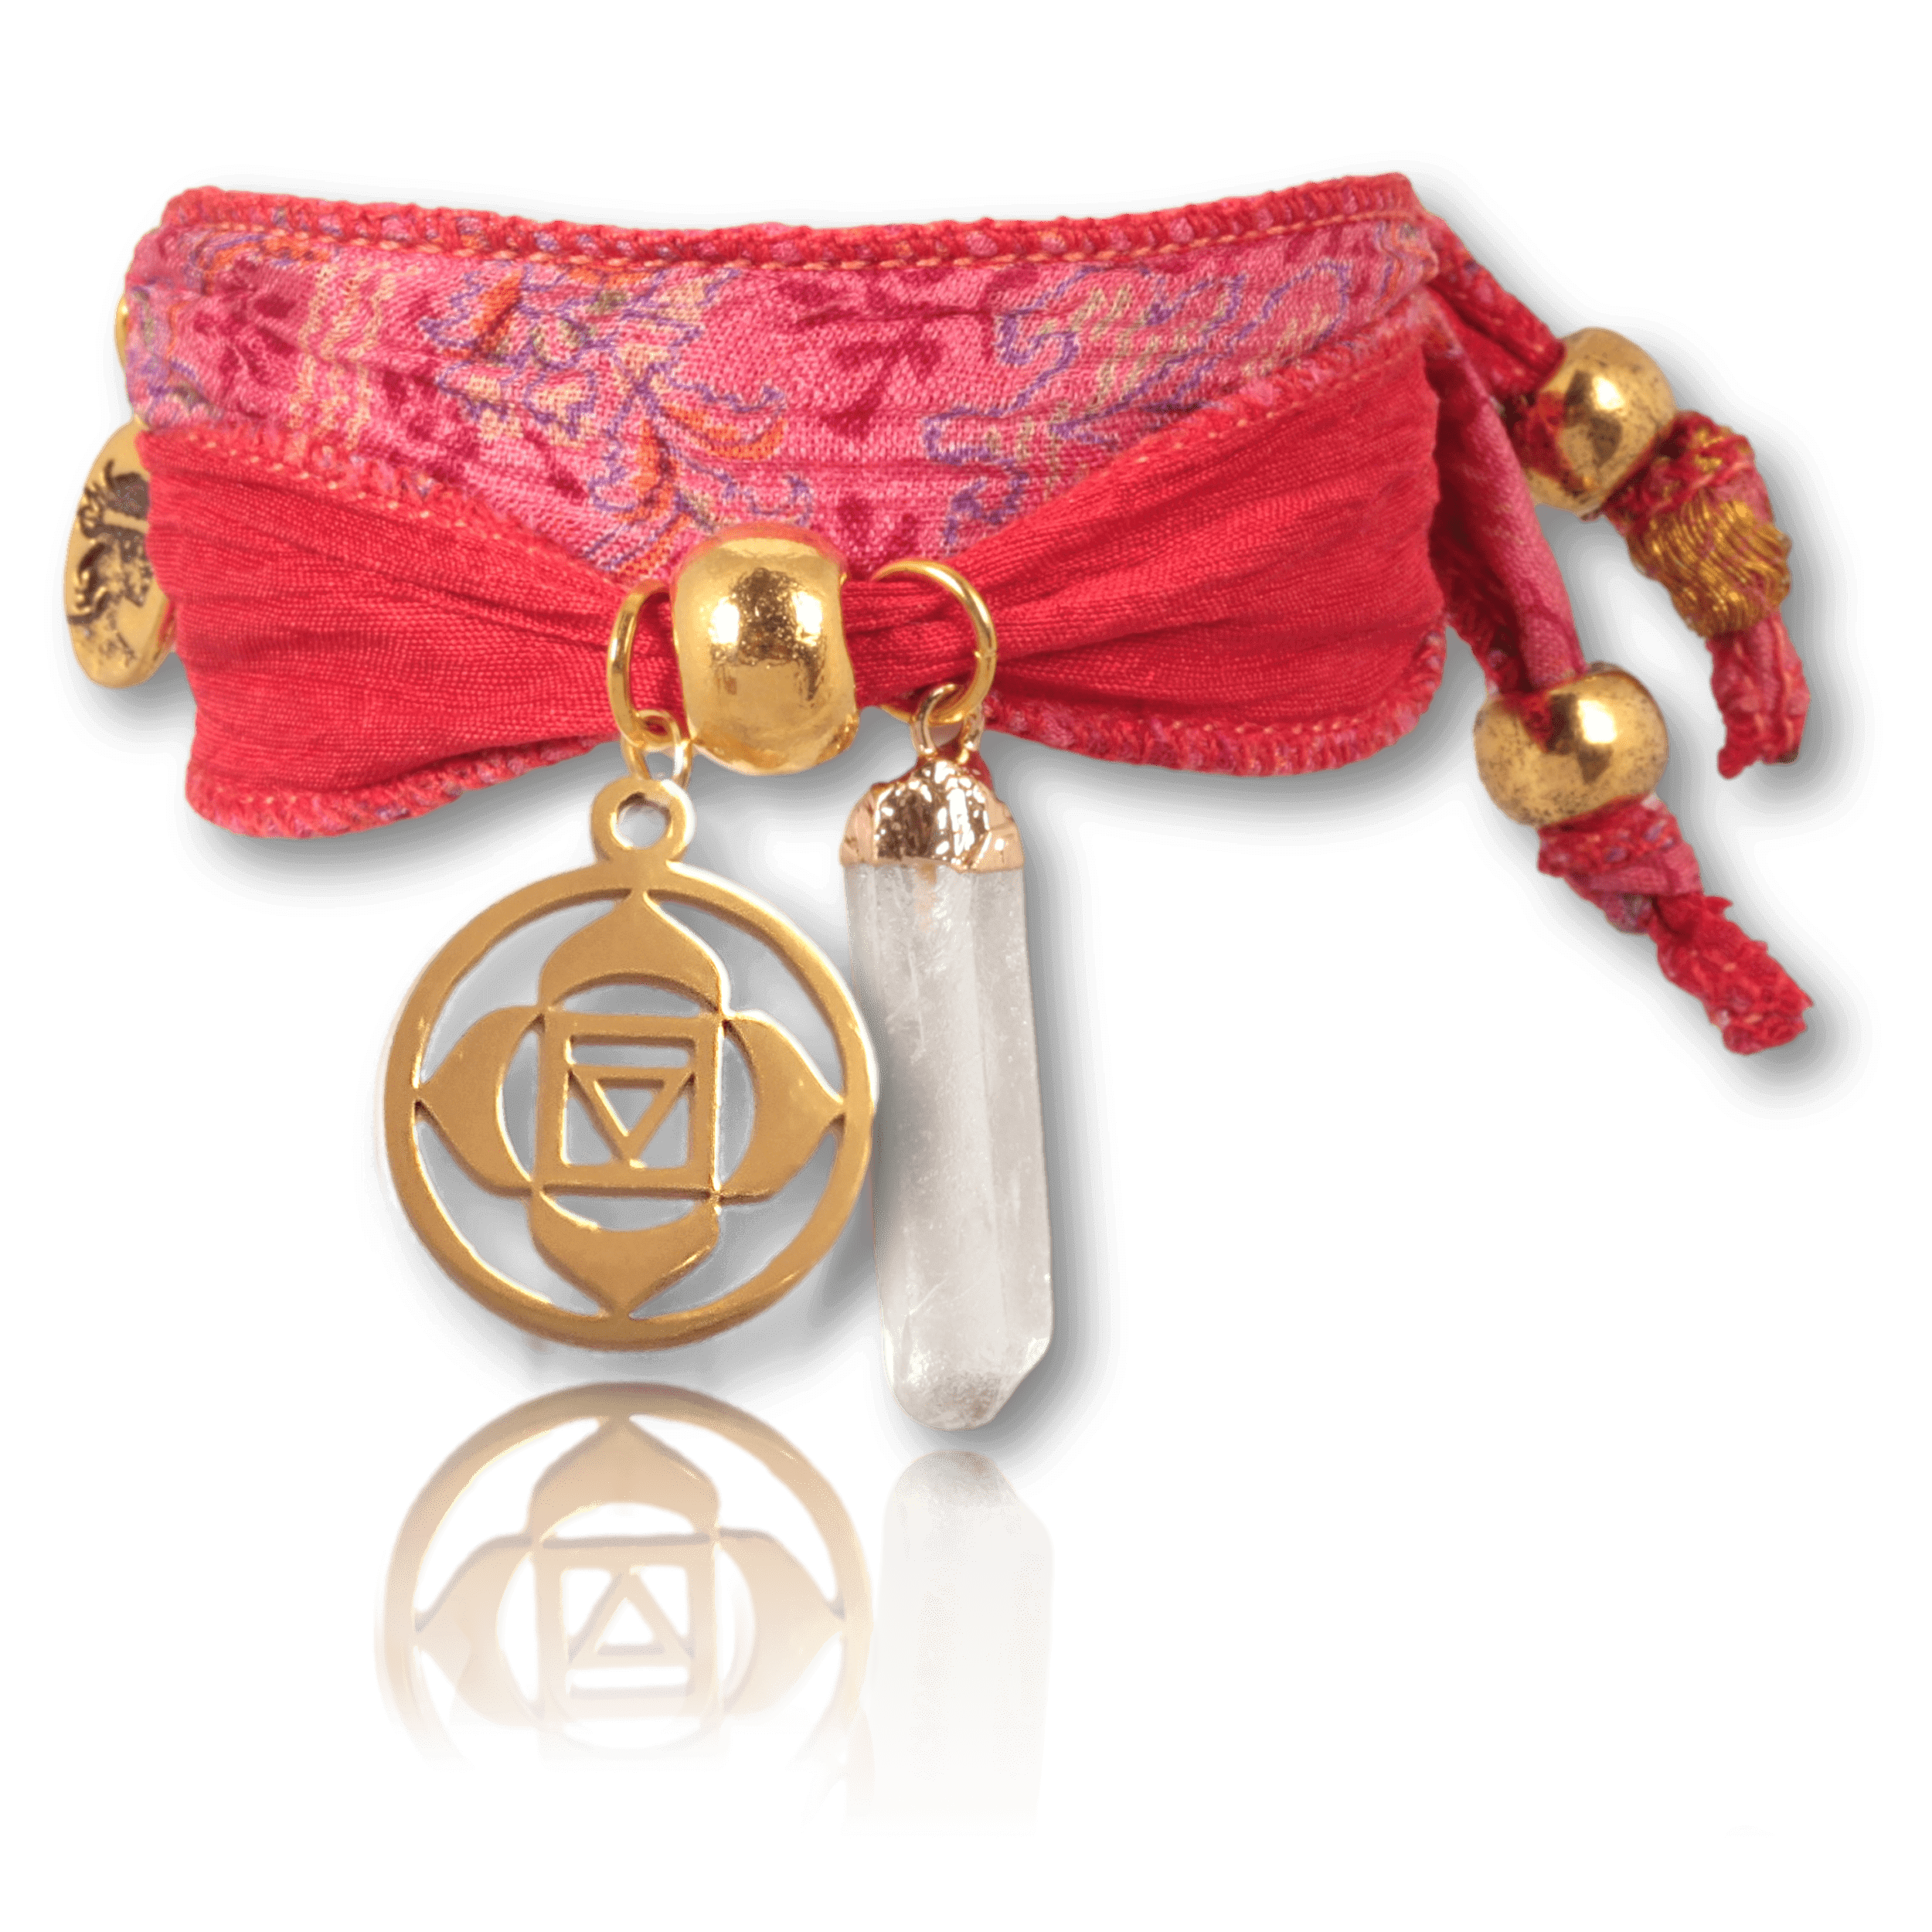 Root chakra bracelet made of Indian saris and gold-plated stainless steel